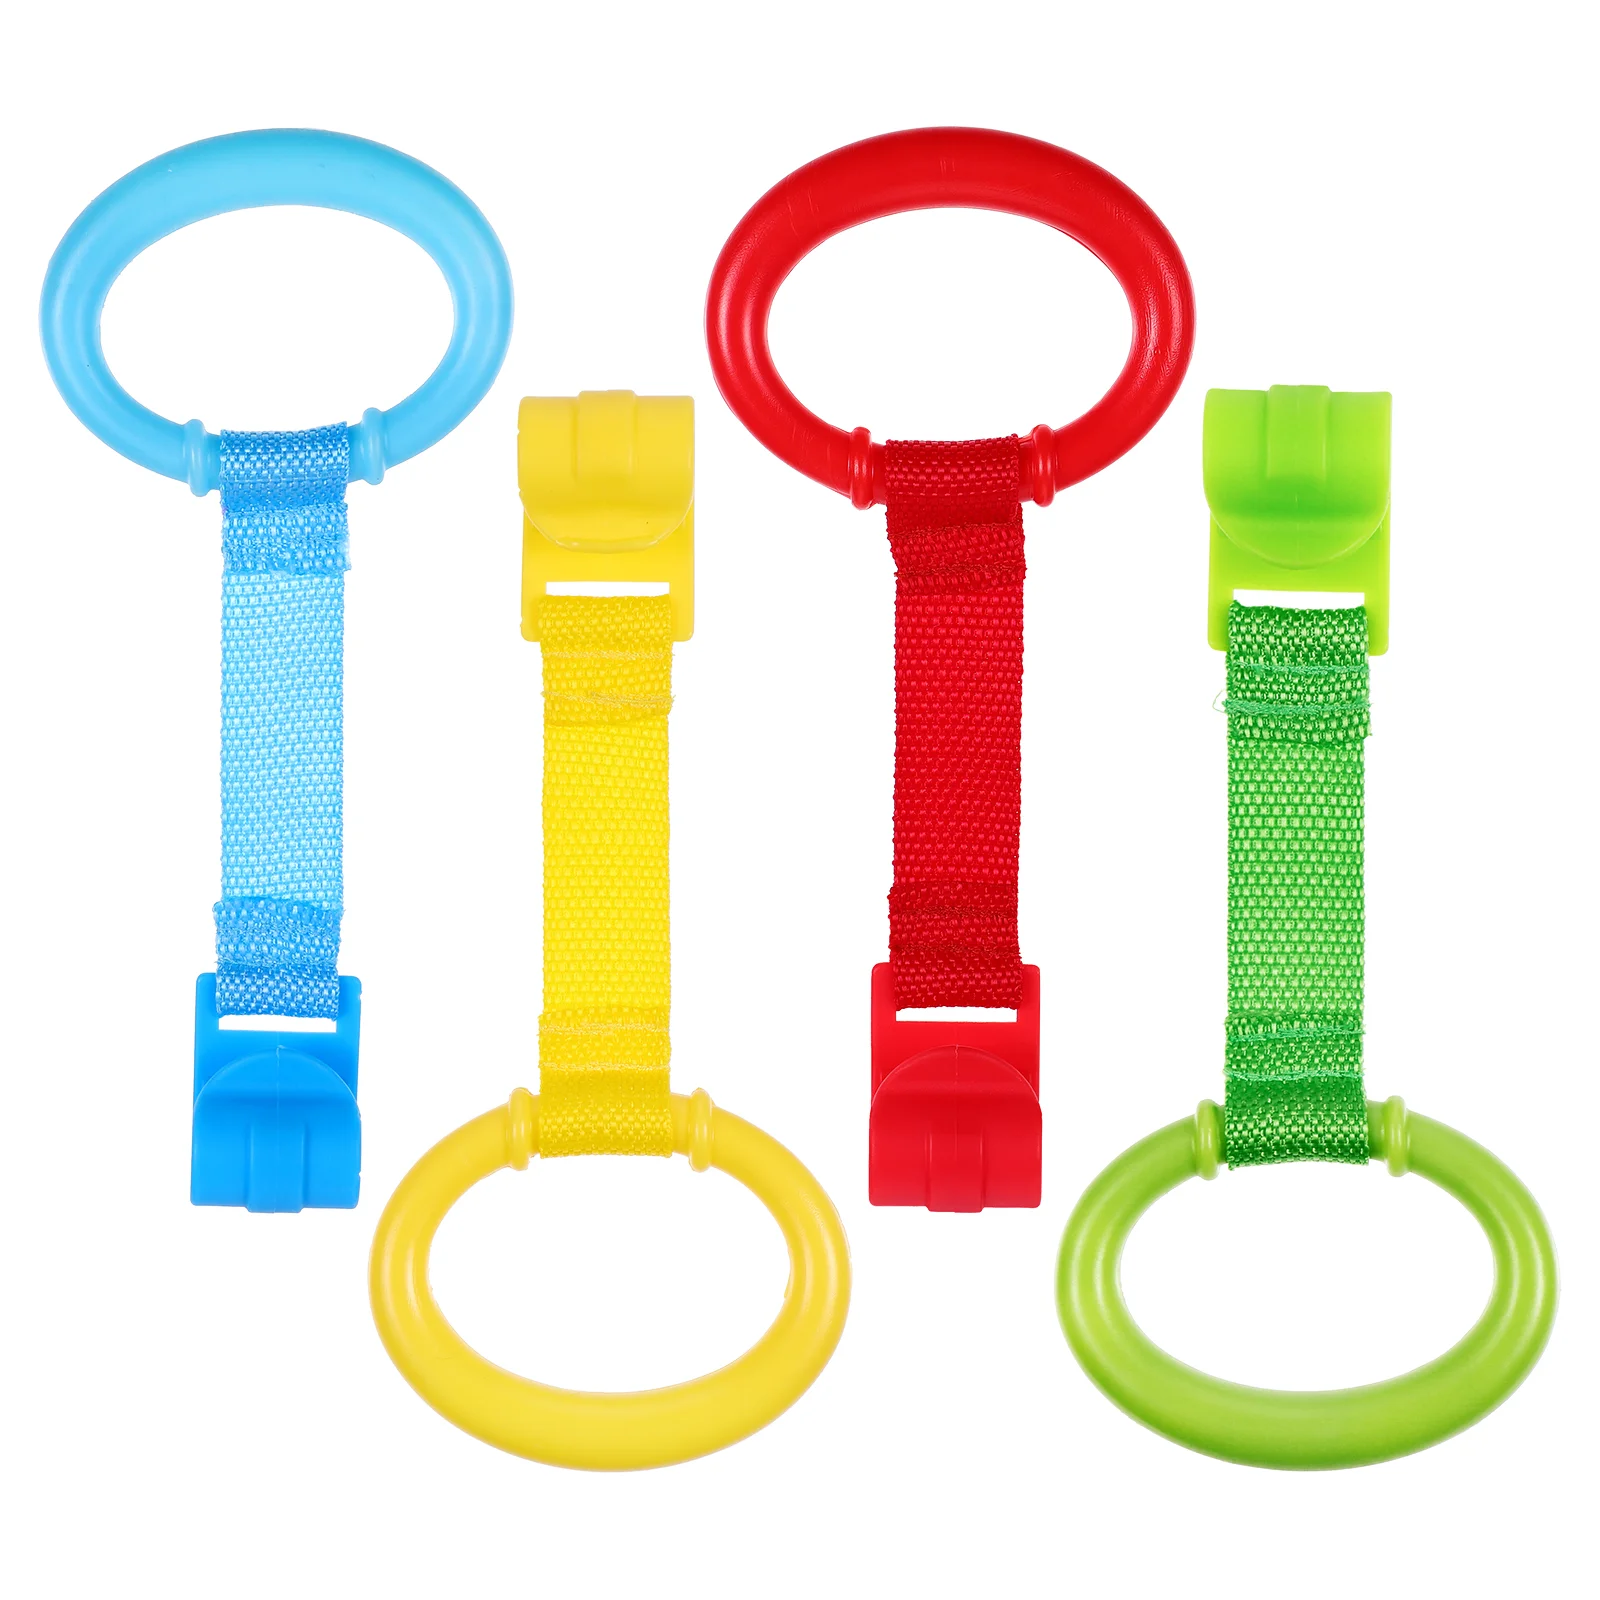 

Baby Rings Up Ring Stand Crib Walking Toys Cot Toy Gym Bed Playpen Hanging Toddler Training Assistant Tool Infant Kids Nursery